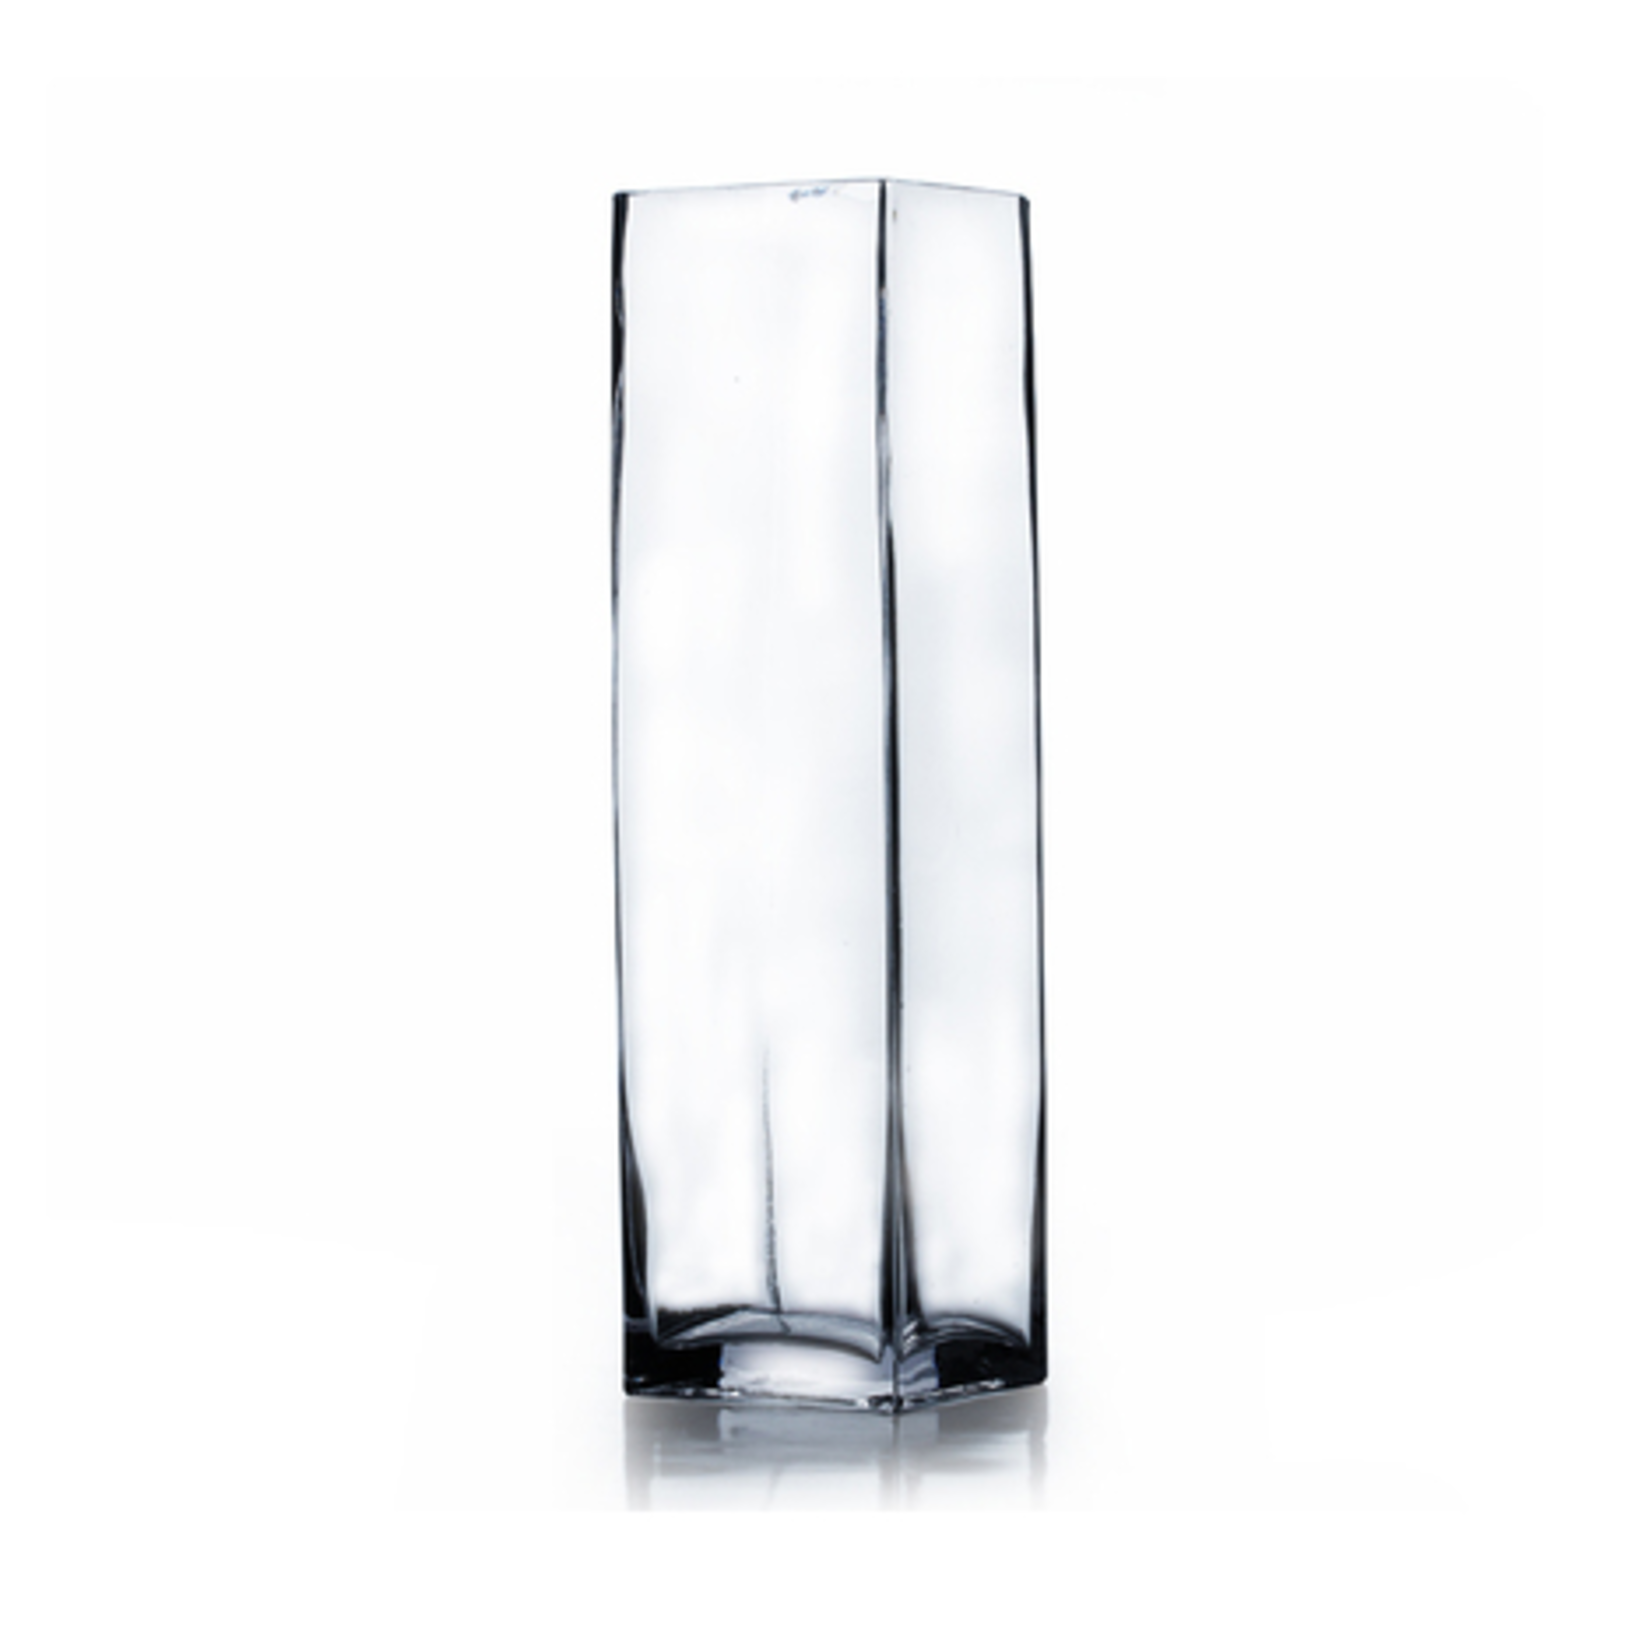 12"h x 4" x 4" GLASS SQUARE OPENING VASE